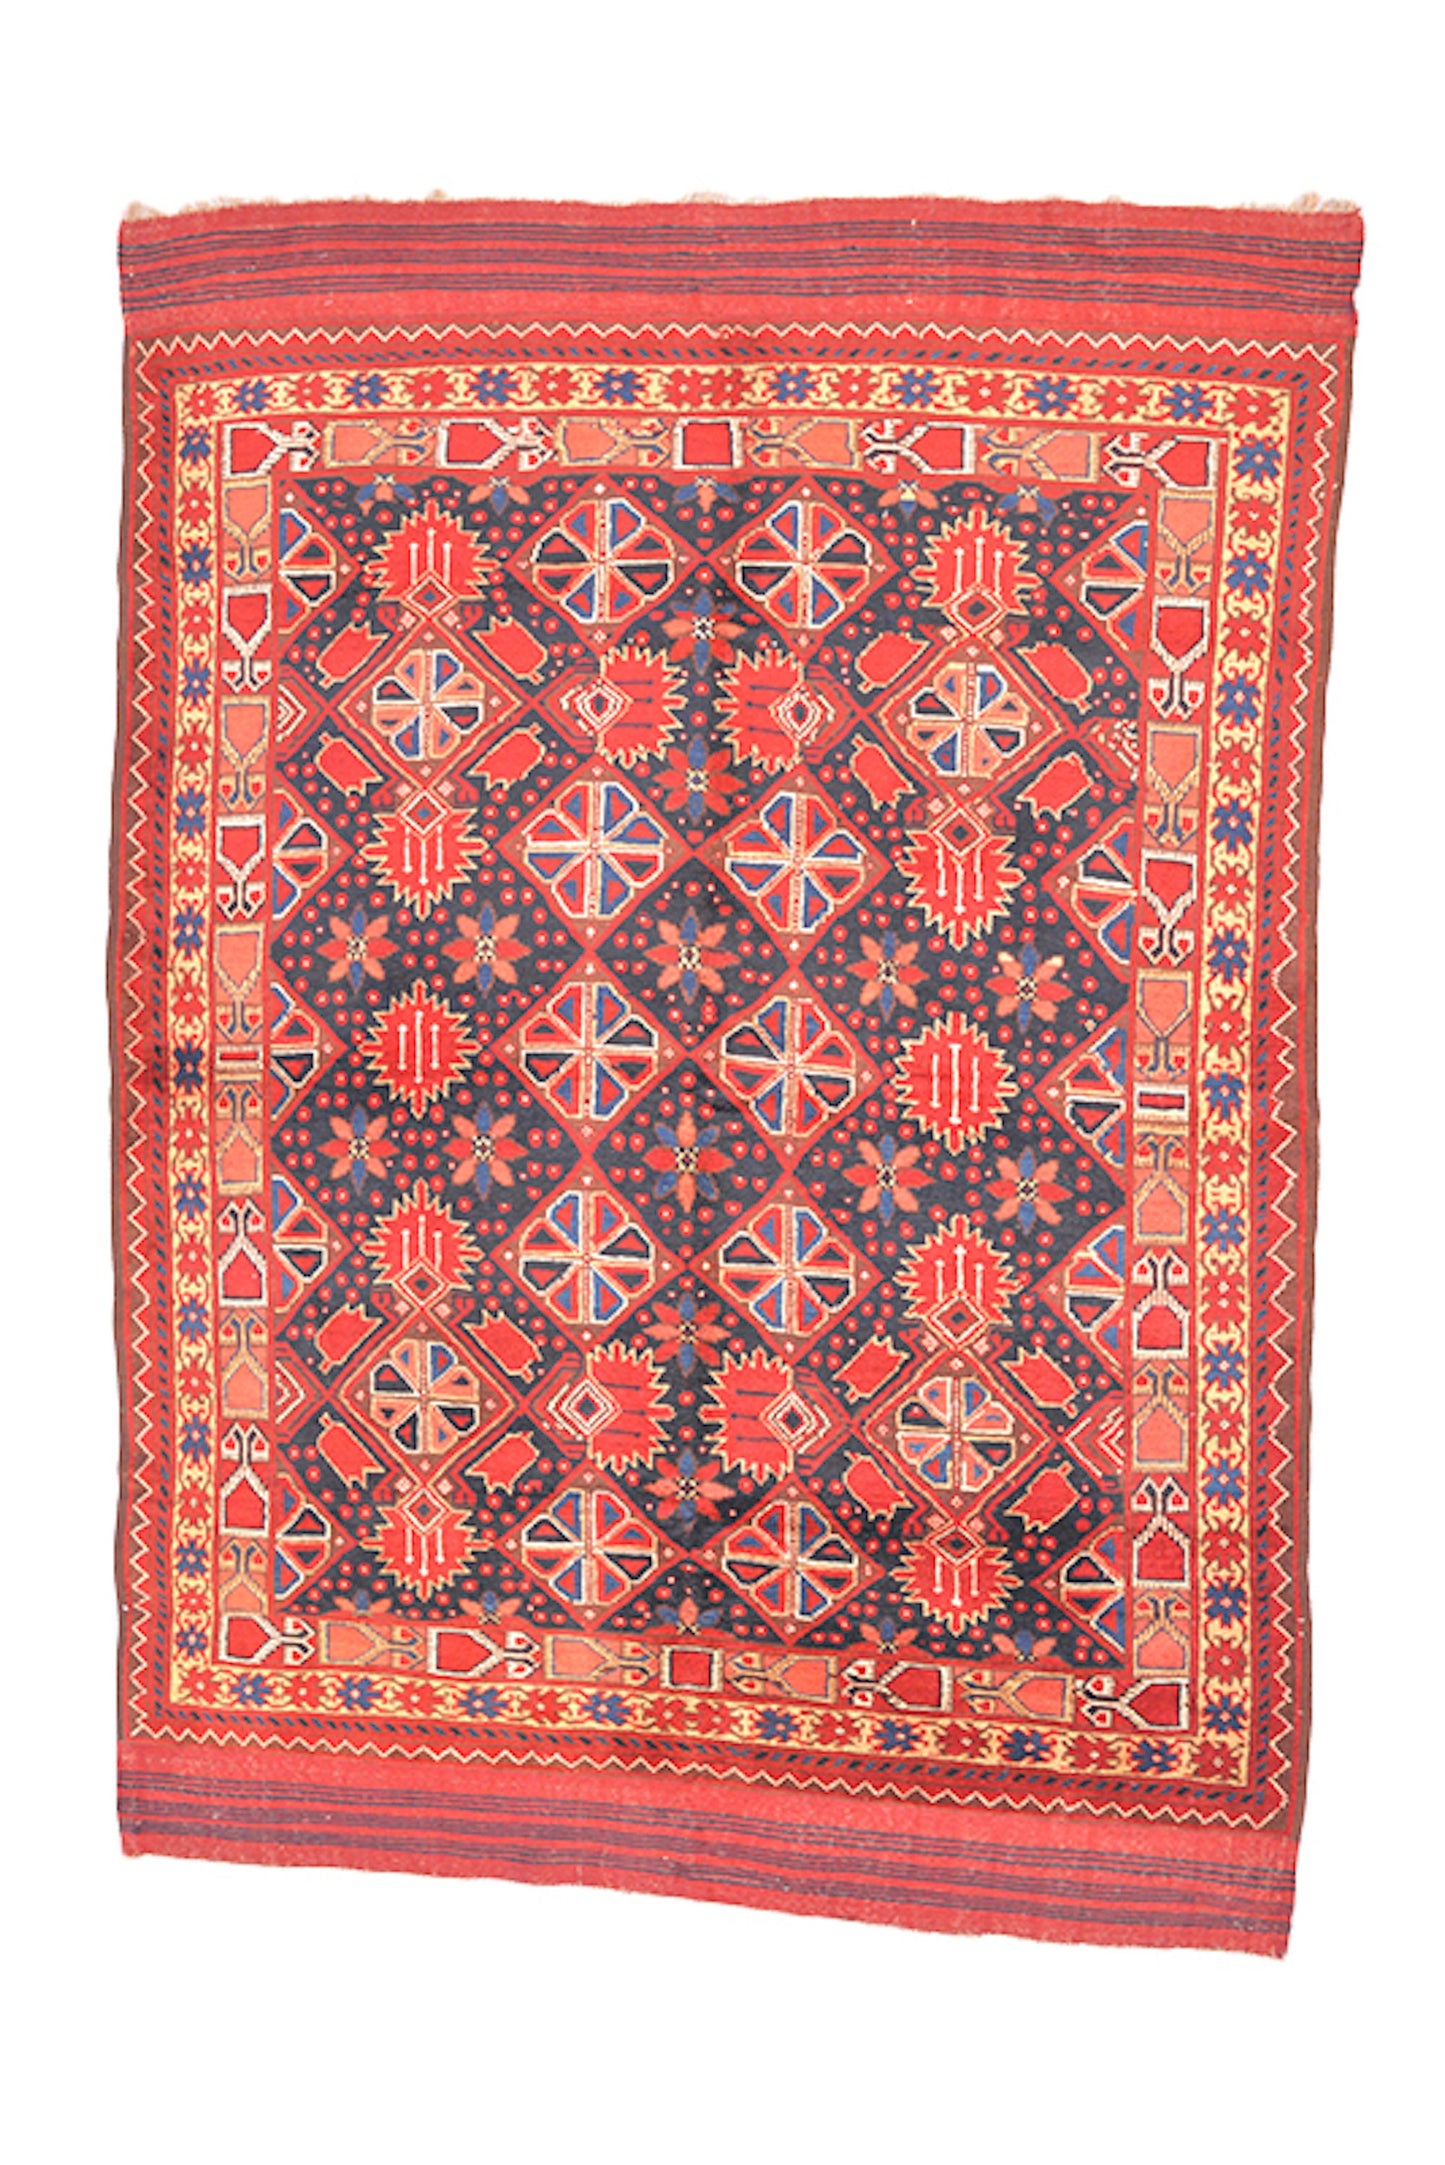 5 x 6 Orange Navy Vintage Area Rug | Handmade Tribal Rug with Wool | Geometric Pattern of Red Floral on Navy Background | Bohemian Colorful